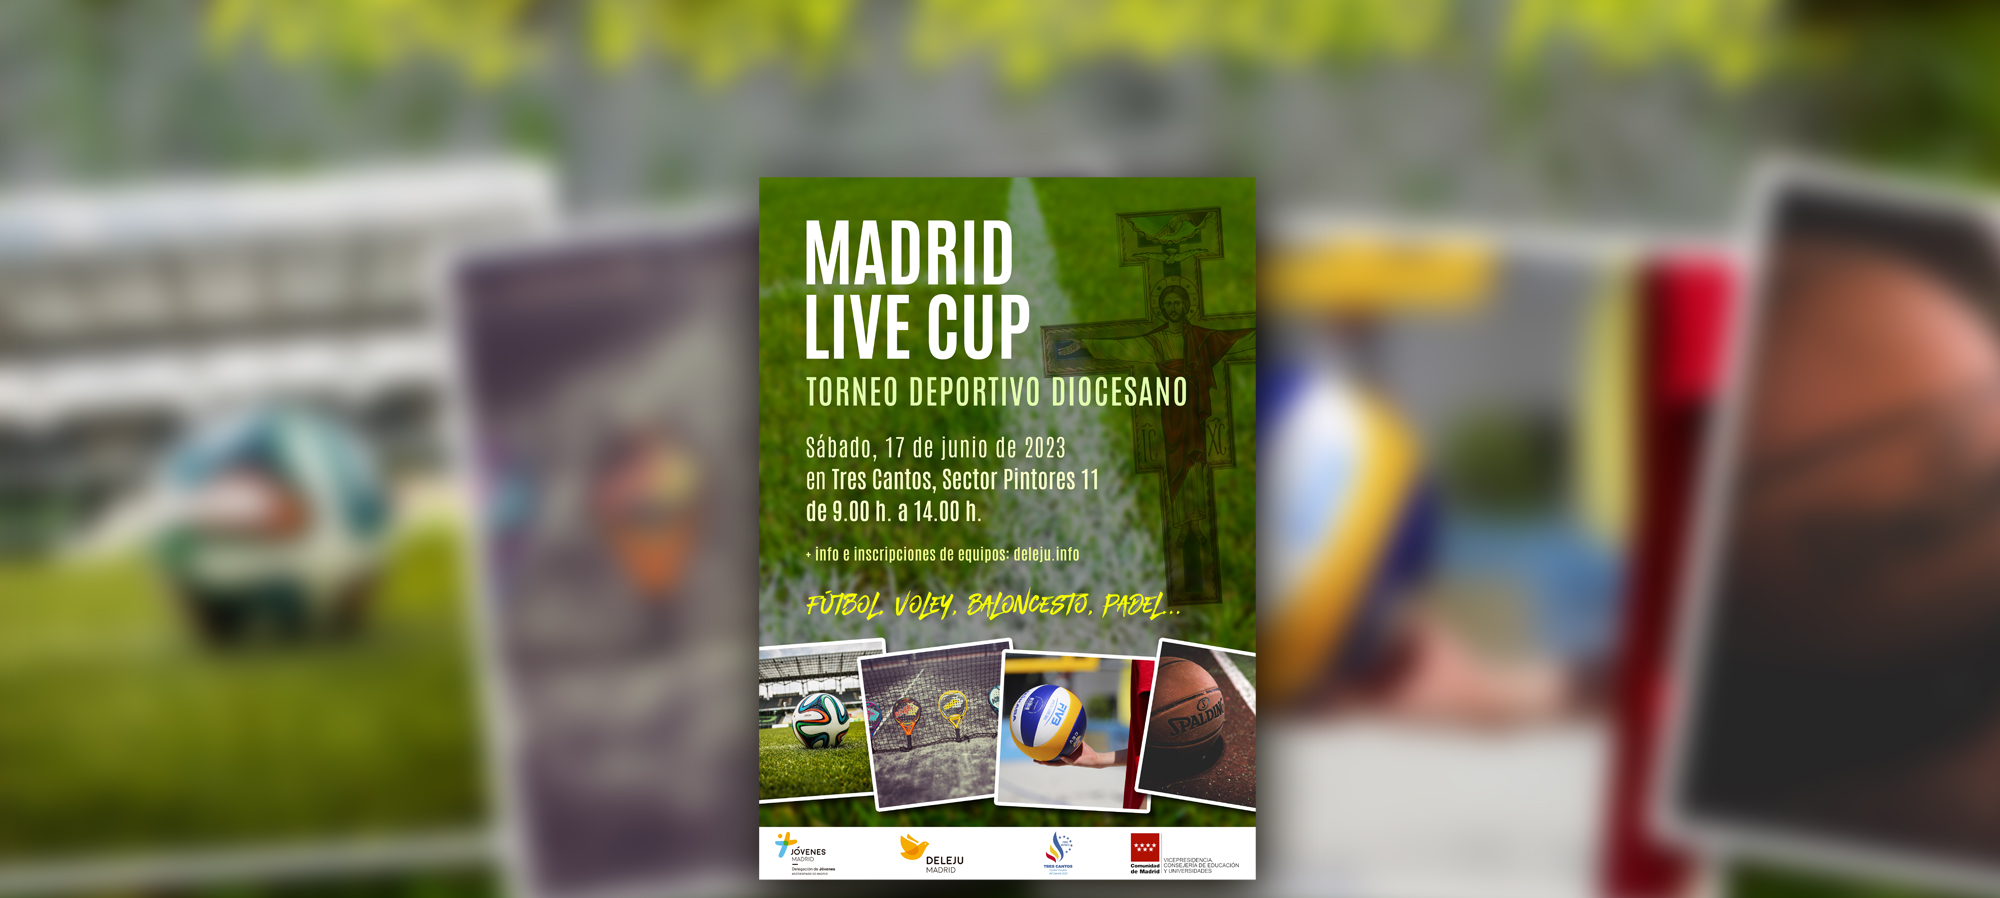 MADRID LIVE CUP